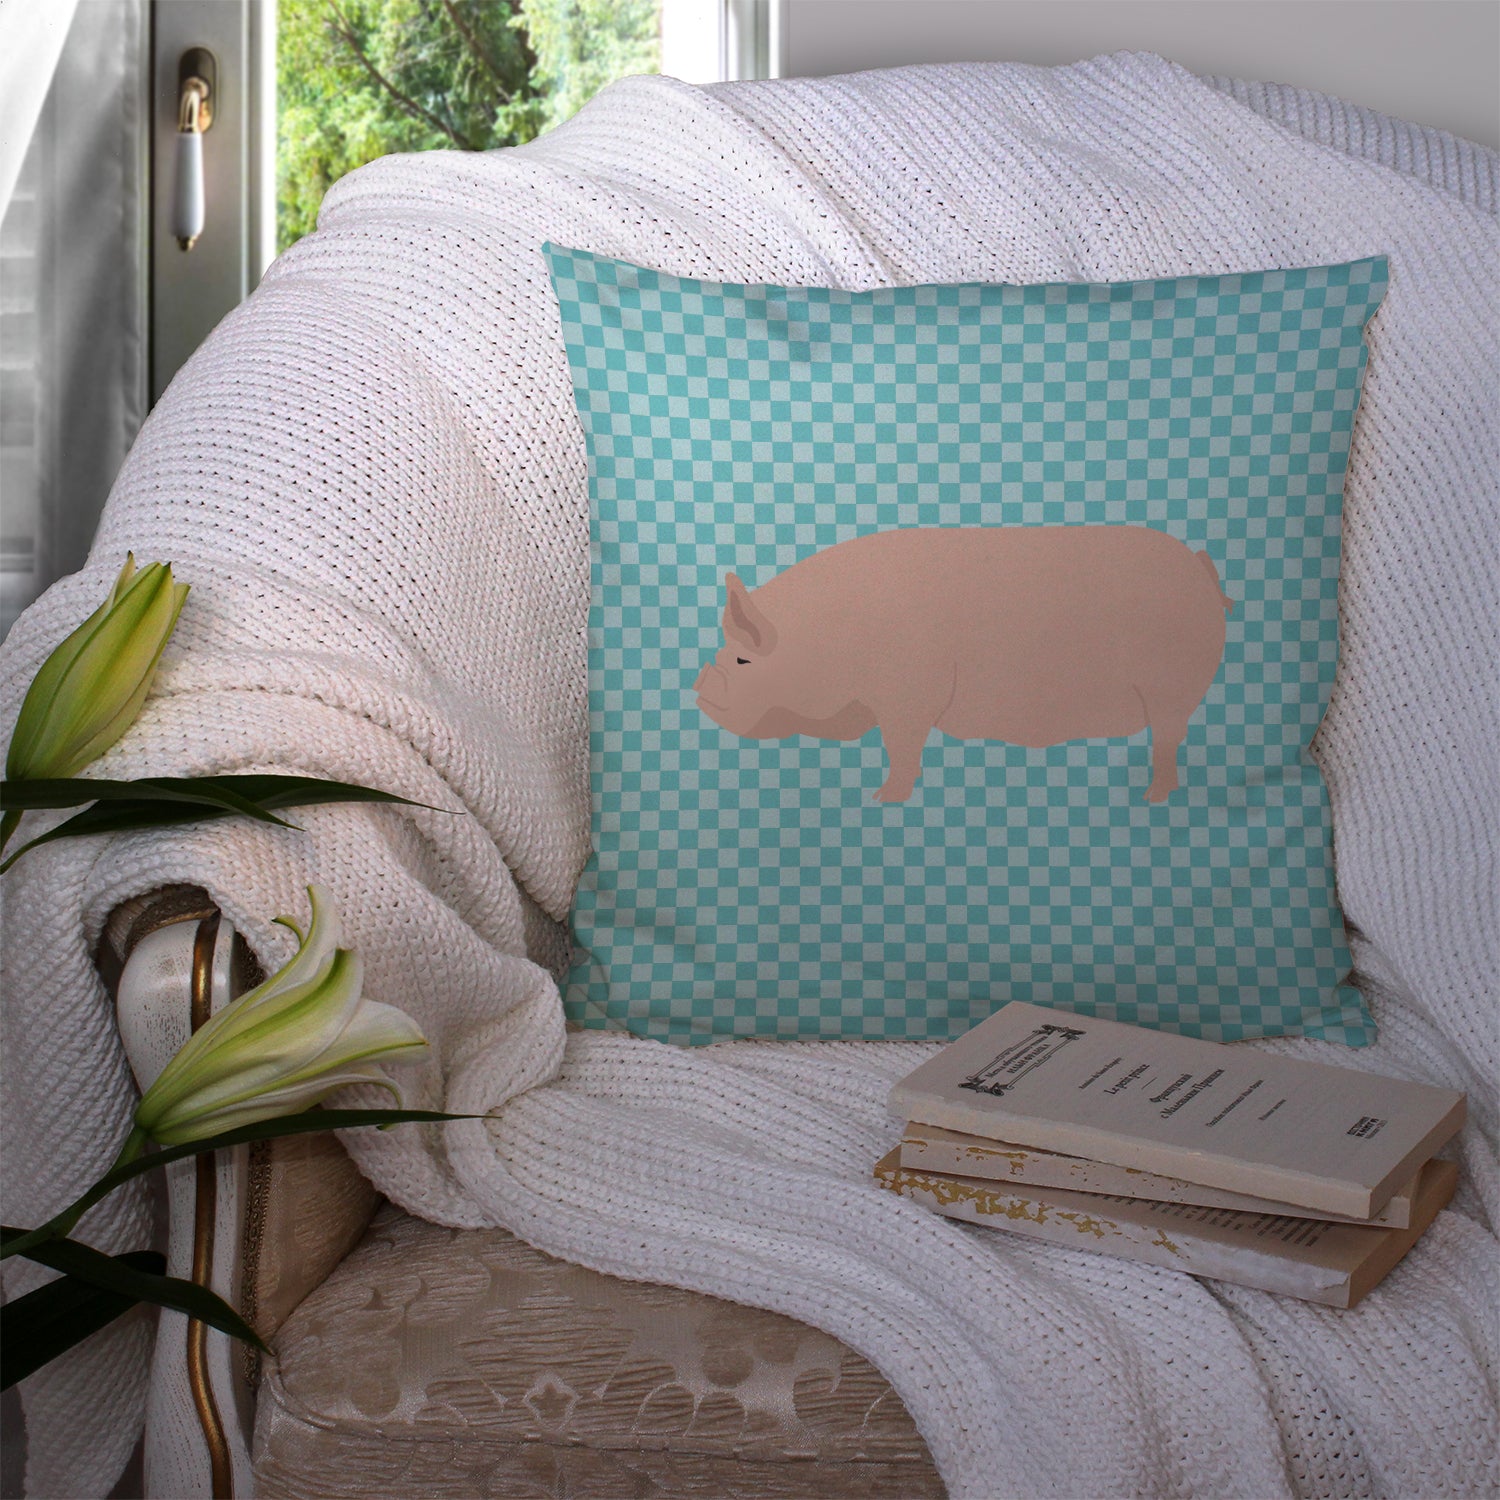 Welsh Pig Blue Check Fabric Decorative Pillow BB8111PW1414 - the-store.com